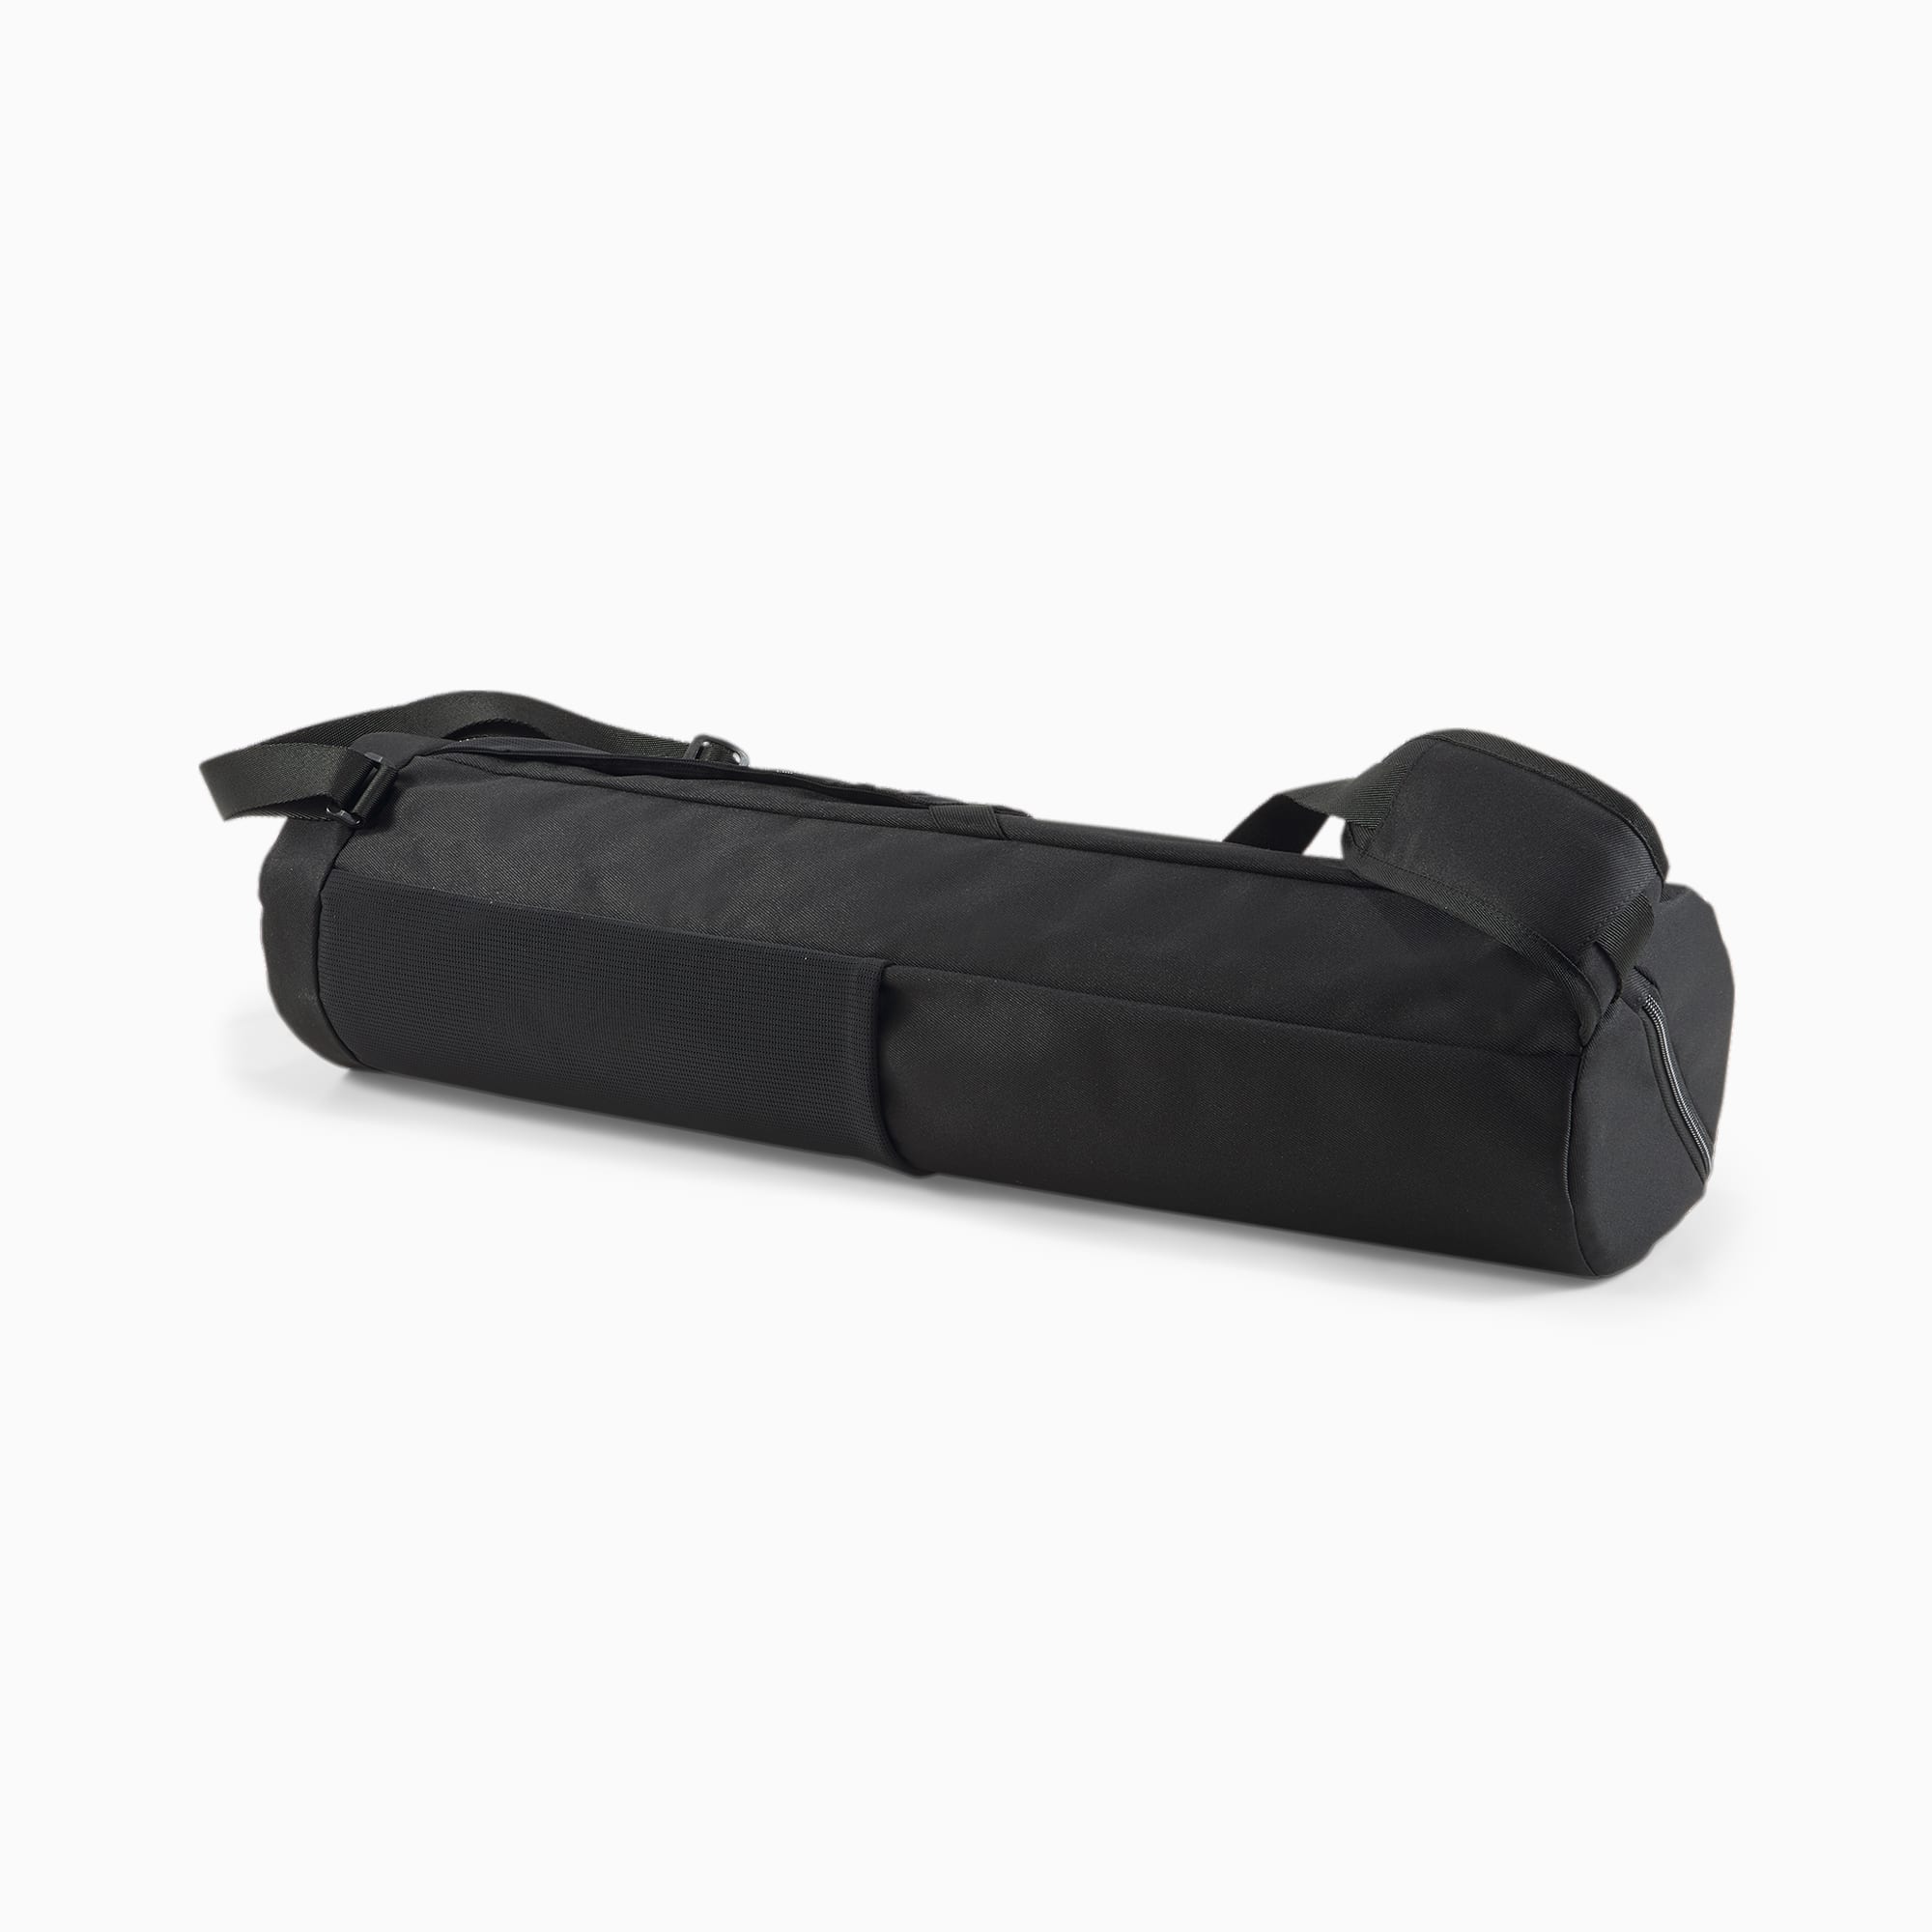  YogaAddict Yoga Mat Bag Supreme With Pocket, 30 Long, Fit  Most Mat Size, Extra Wide, Easy Access - Black : Sports & Outdoors